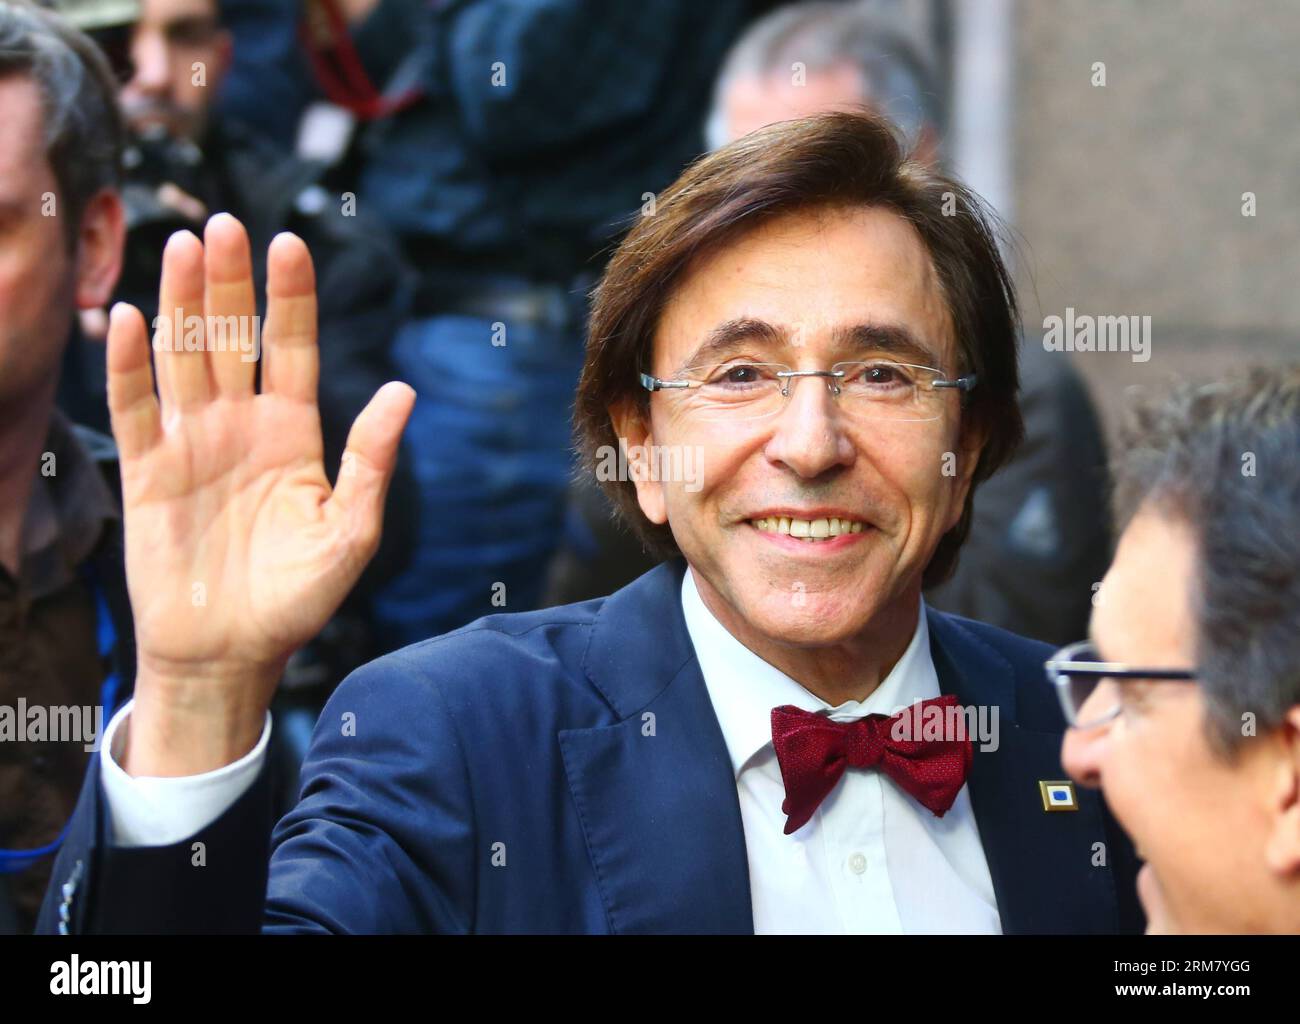 (140320) -- BRUSSELS, March 20, 2014 (Xinhua) -- Belgian Prime Minister Elio Di Rupo arrives to attend the European Union (EU) Summit at the EU headquarters in Brussels, capital of Belgium, March 20, 2014. The EU spring summit will focus on industrial competitiveness, Ukraine and the bloc s energy strategy. (Xinhua/Gong Bing)(zl) BELGIUM-BRUSSELS-EU-SUMMIT-UKRAINE PUBLICATIONxNOTxINxCHN   Brussels March 20 2014 XINHUA Belgian Prime Ministers Elio Tue Rupo arrives to attend The European Union EU Summit AT The EU Headquarters in Brussels Capital of Belgium March 20 2014 The EU Spring Summit will Stock Photo